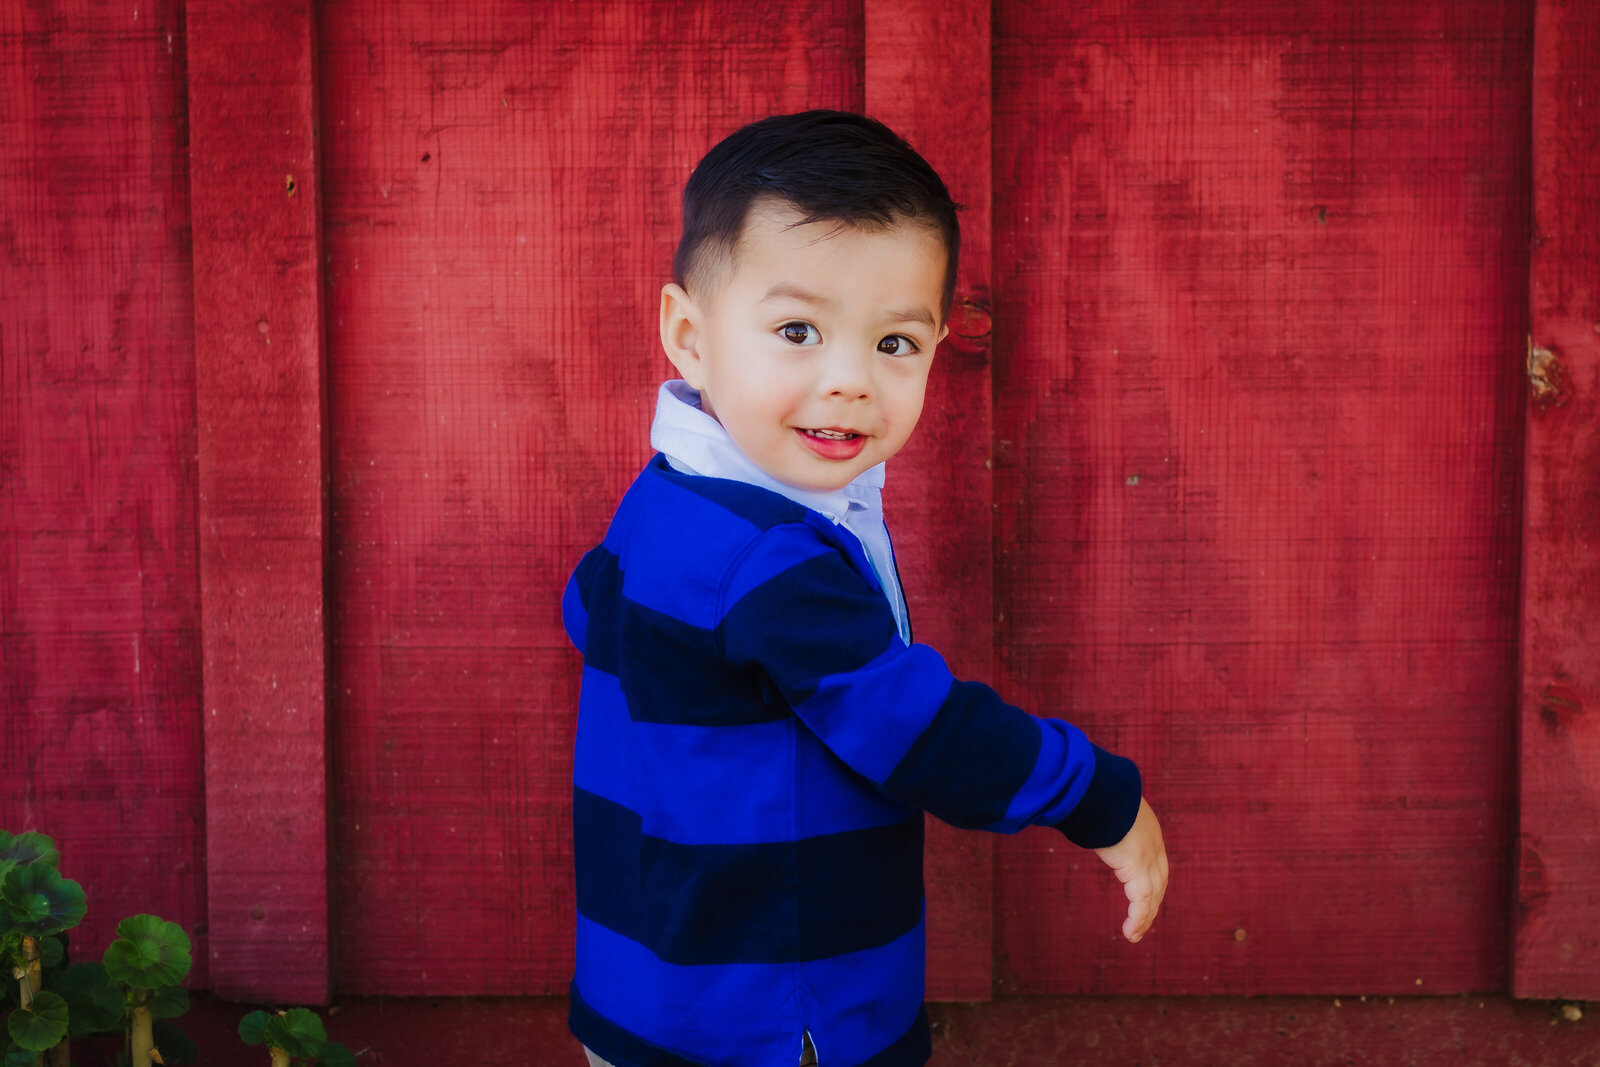 Family Photographer, a boy stands curious and happy before a red fence